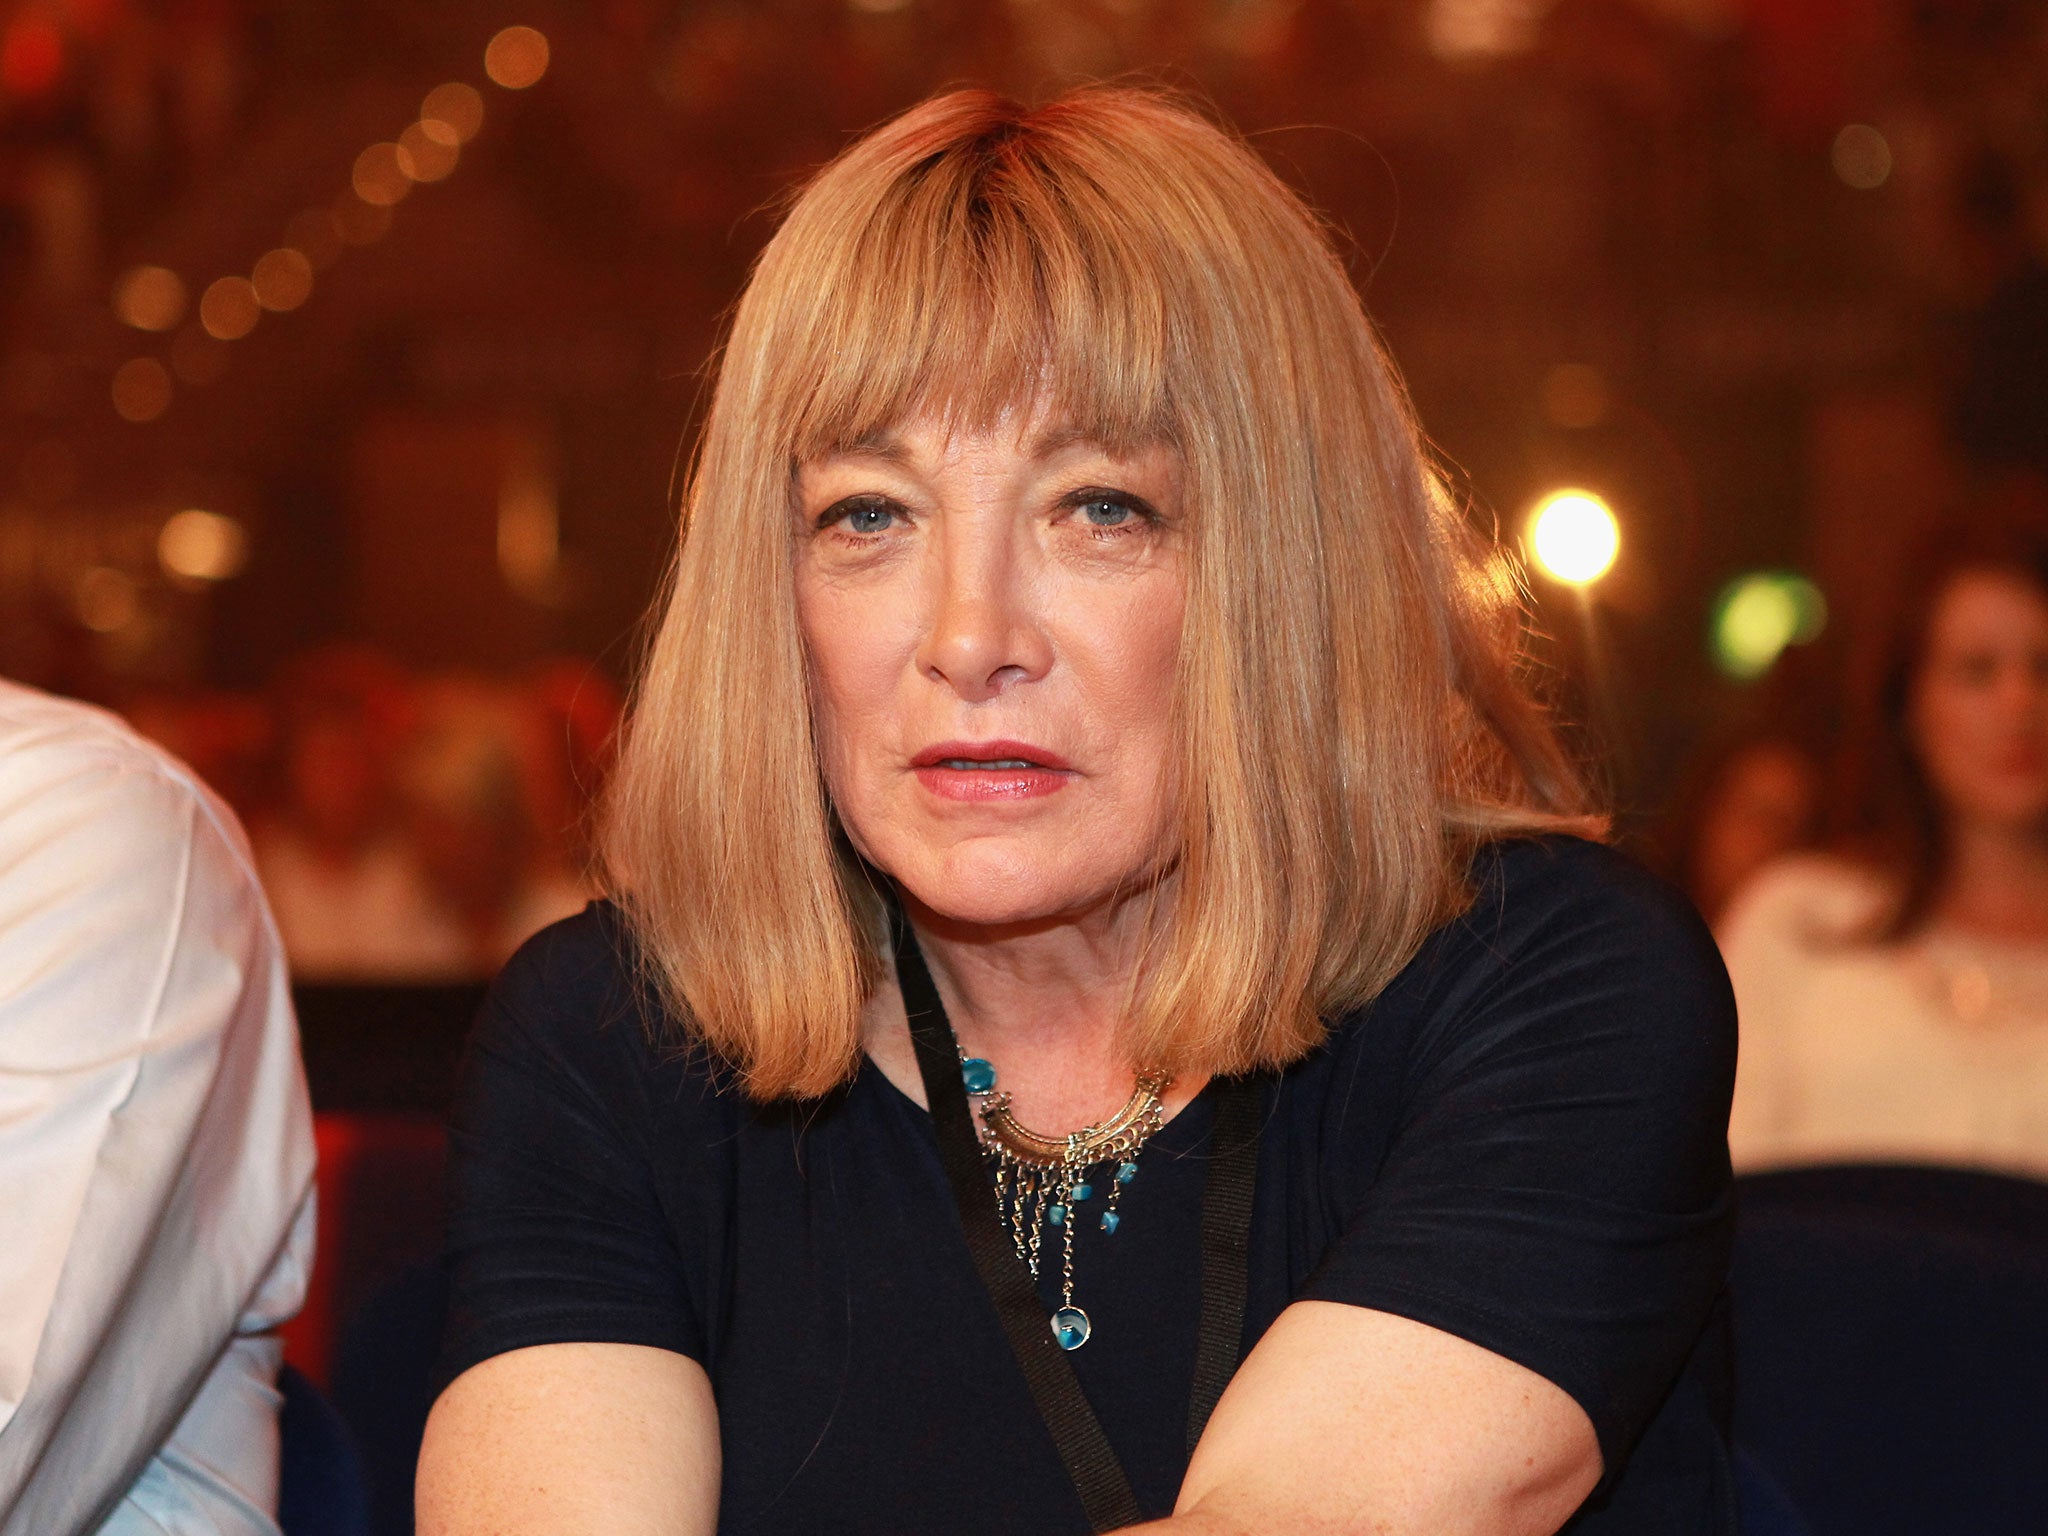 Kellie Maloney, formerly known as Frank